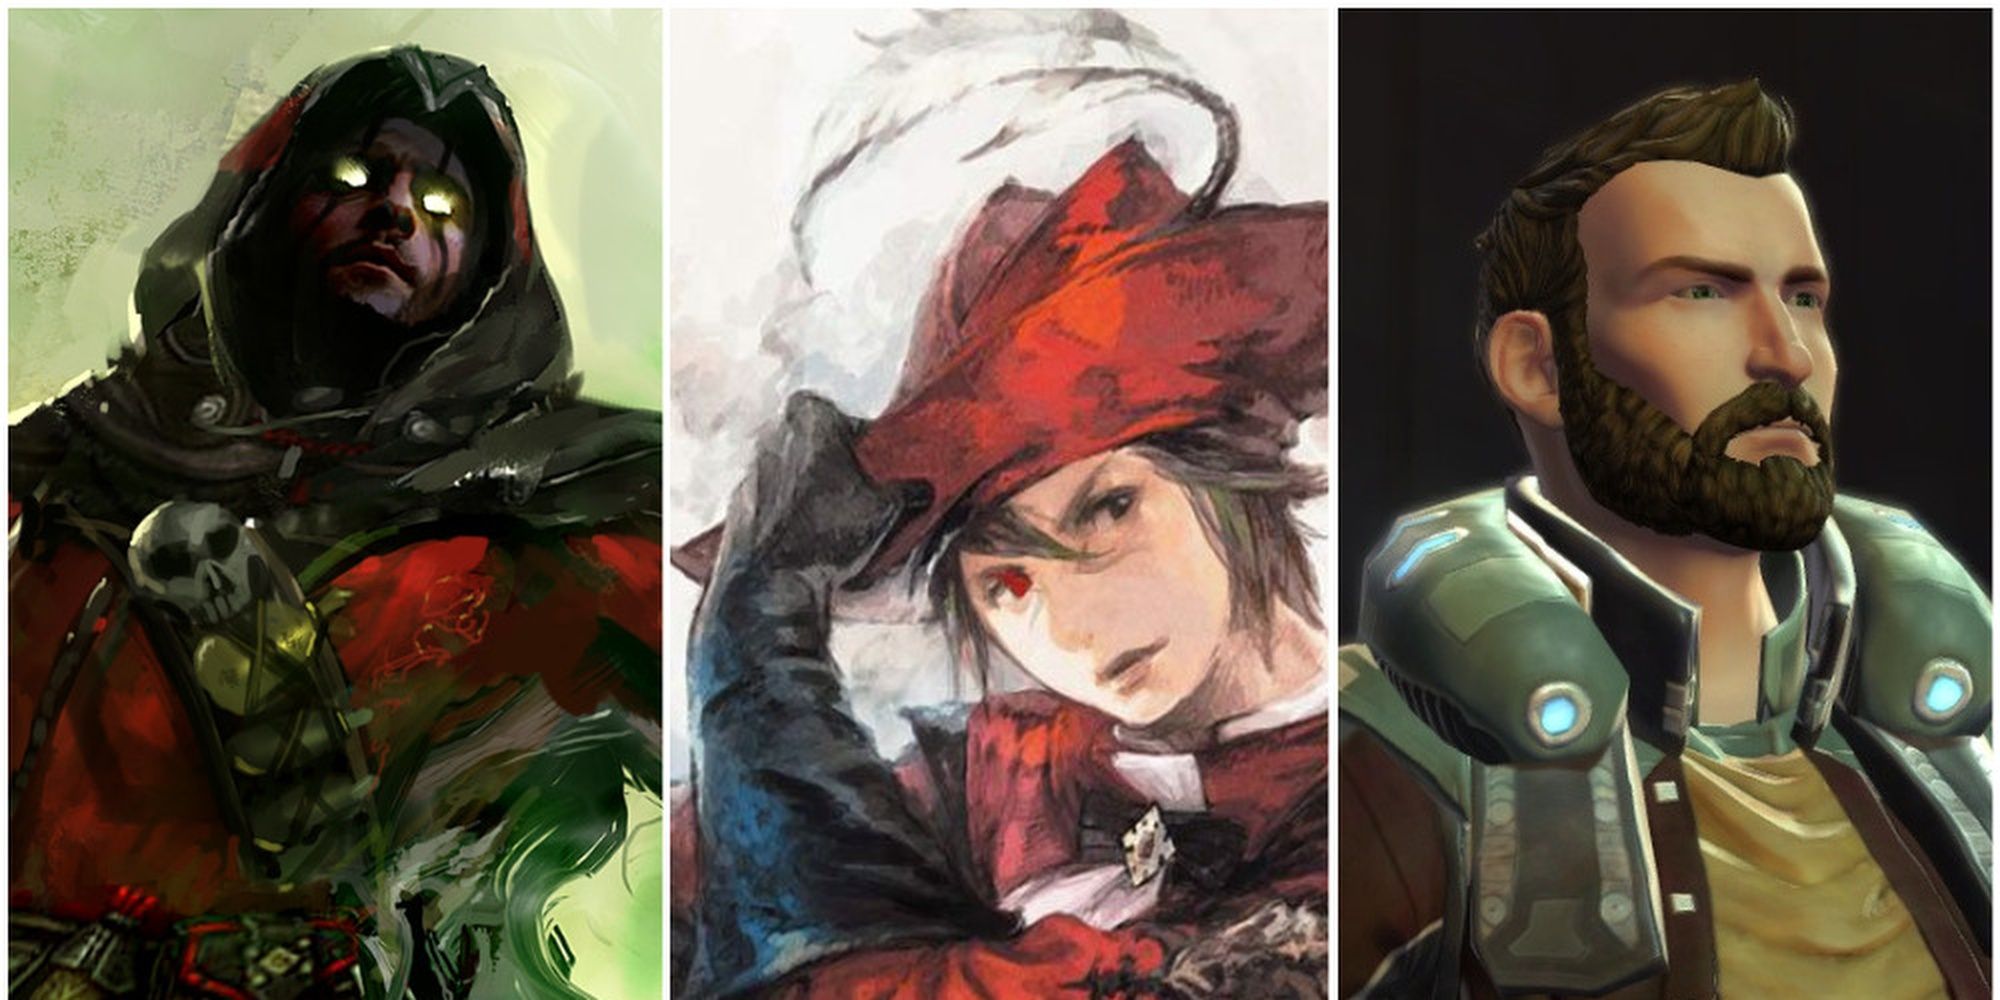 3 Headshots Of A Guild Wars 2 Necromancer A Final Fantasy 14 Red Mage And Star Wars Smuggler 